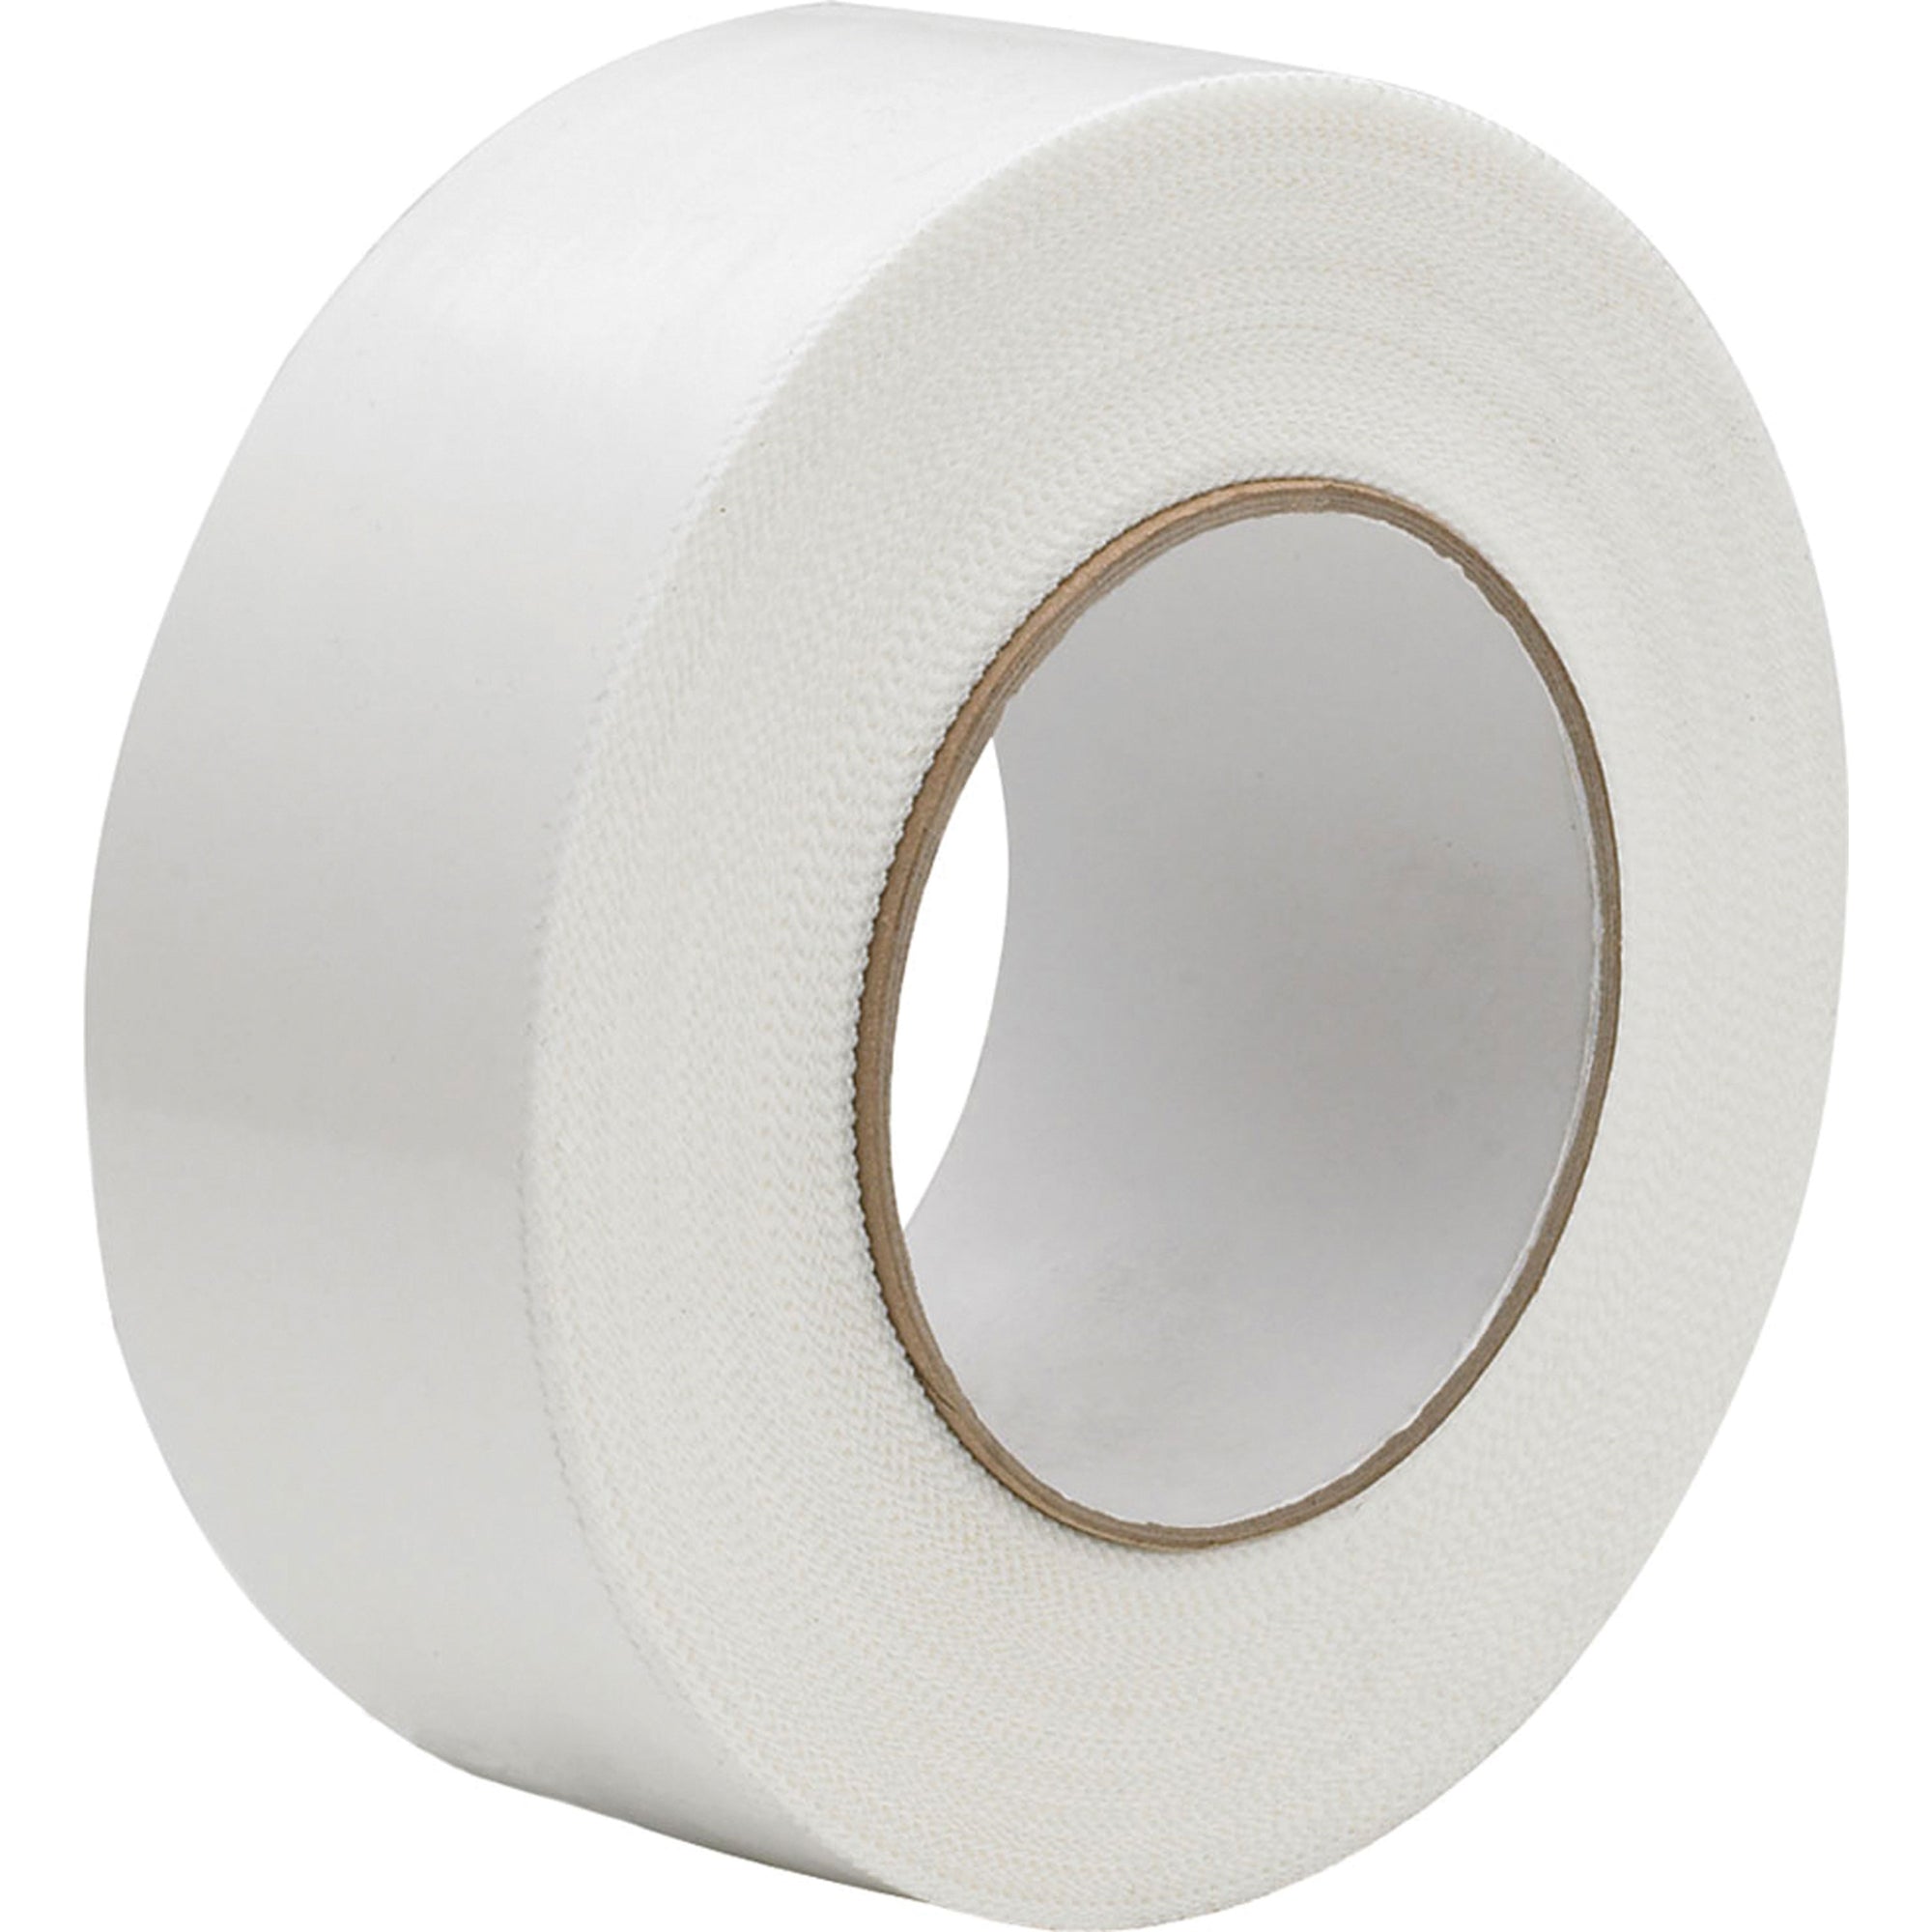 AP Products 022-1364 Tape Encloser 4 in. X 60 Yd, White